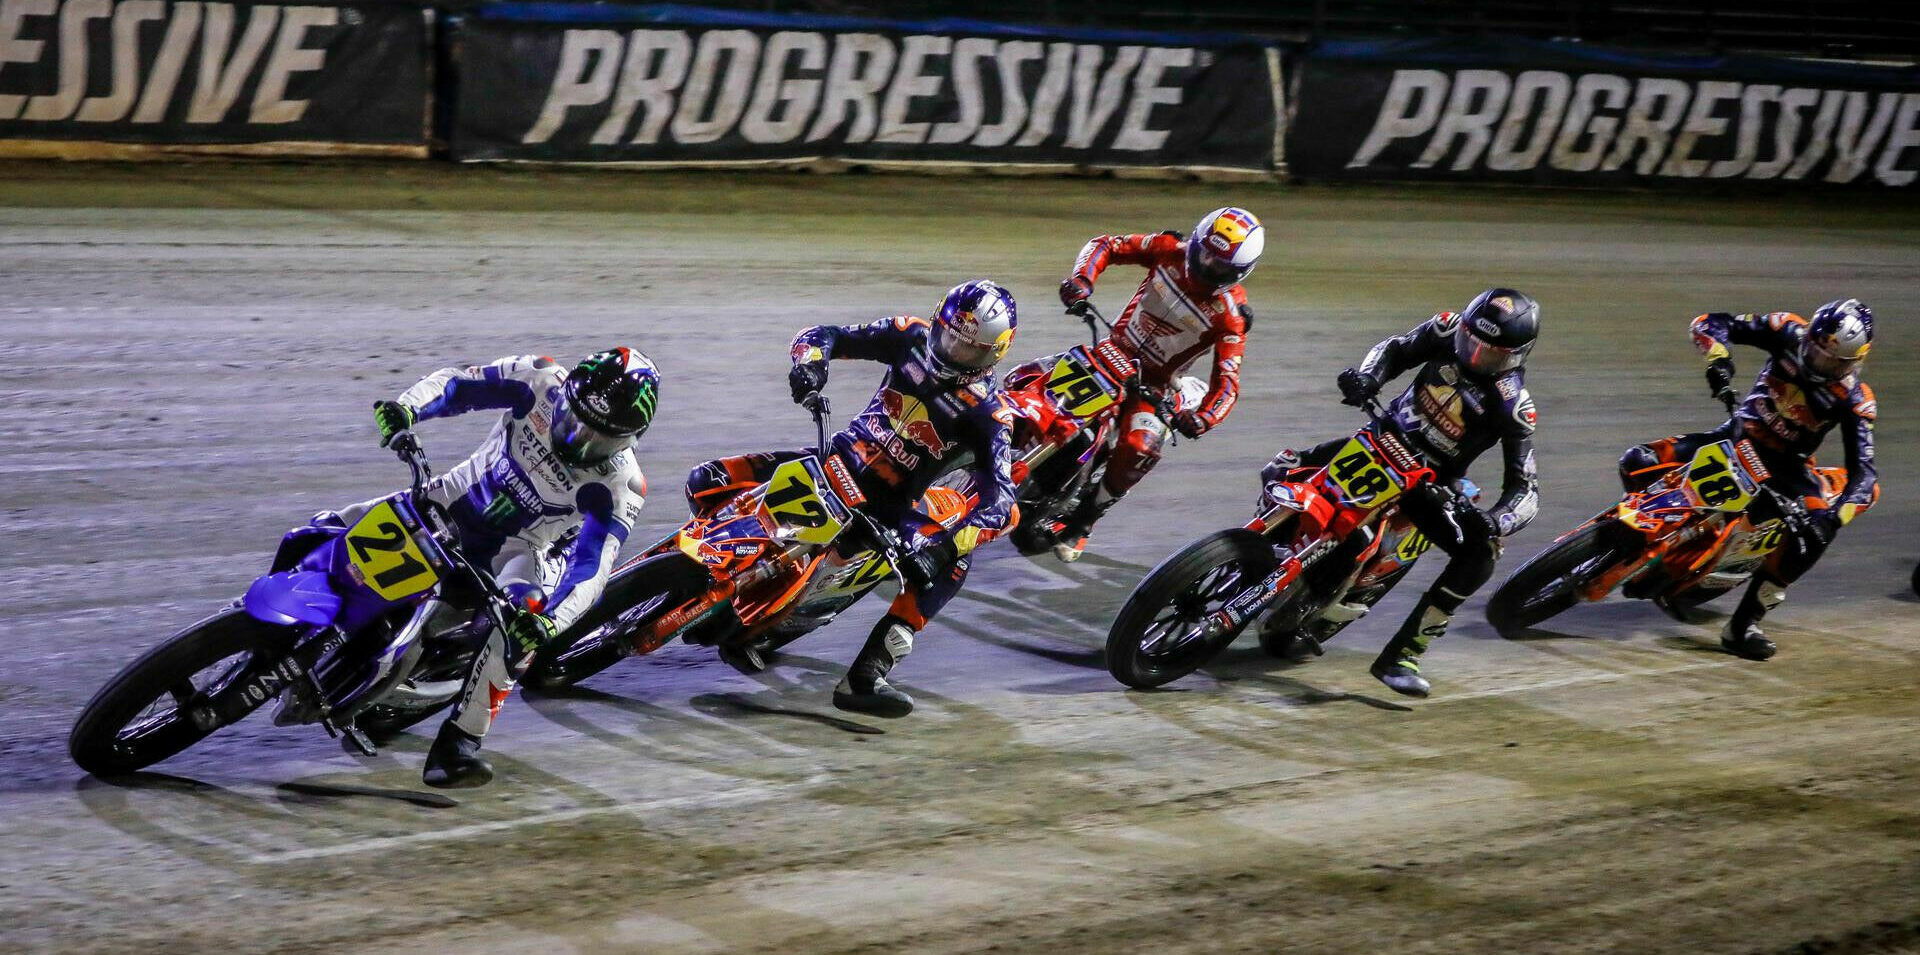 Progressive Insurance will continue as the title sponsor of the American Flat Track (AFT) series for several years to come. Photo courtesy AFT.